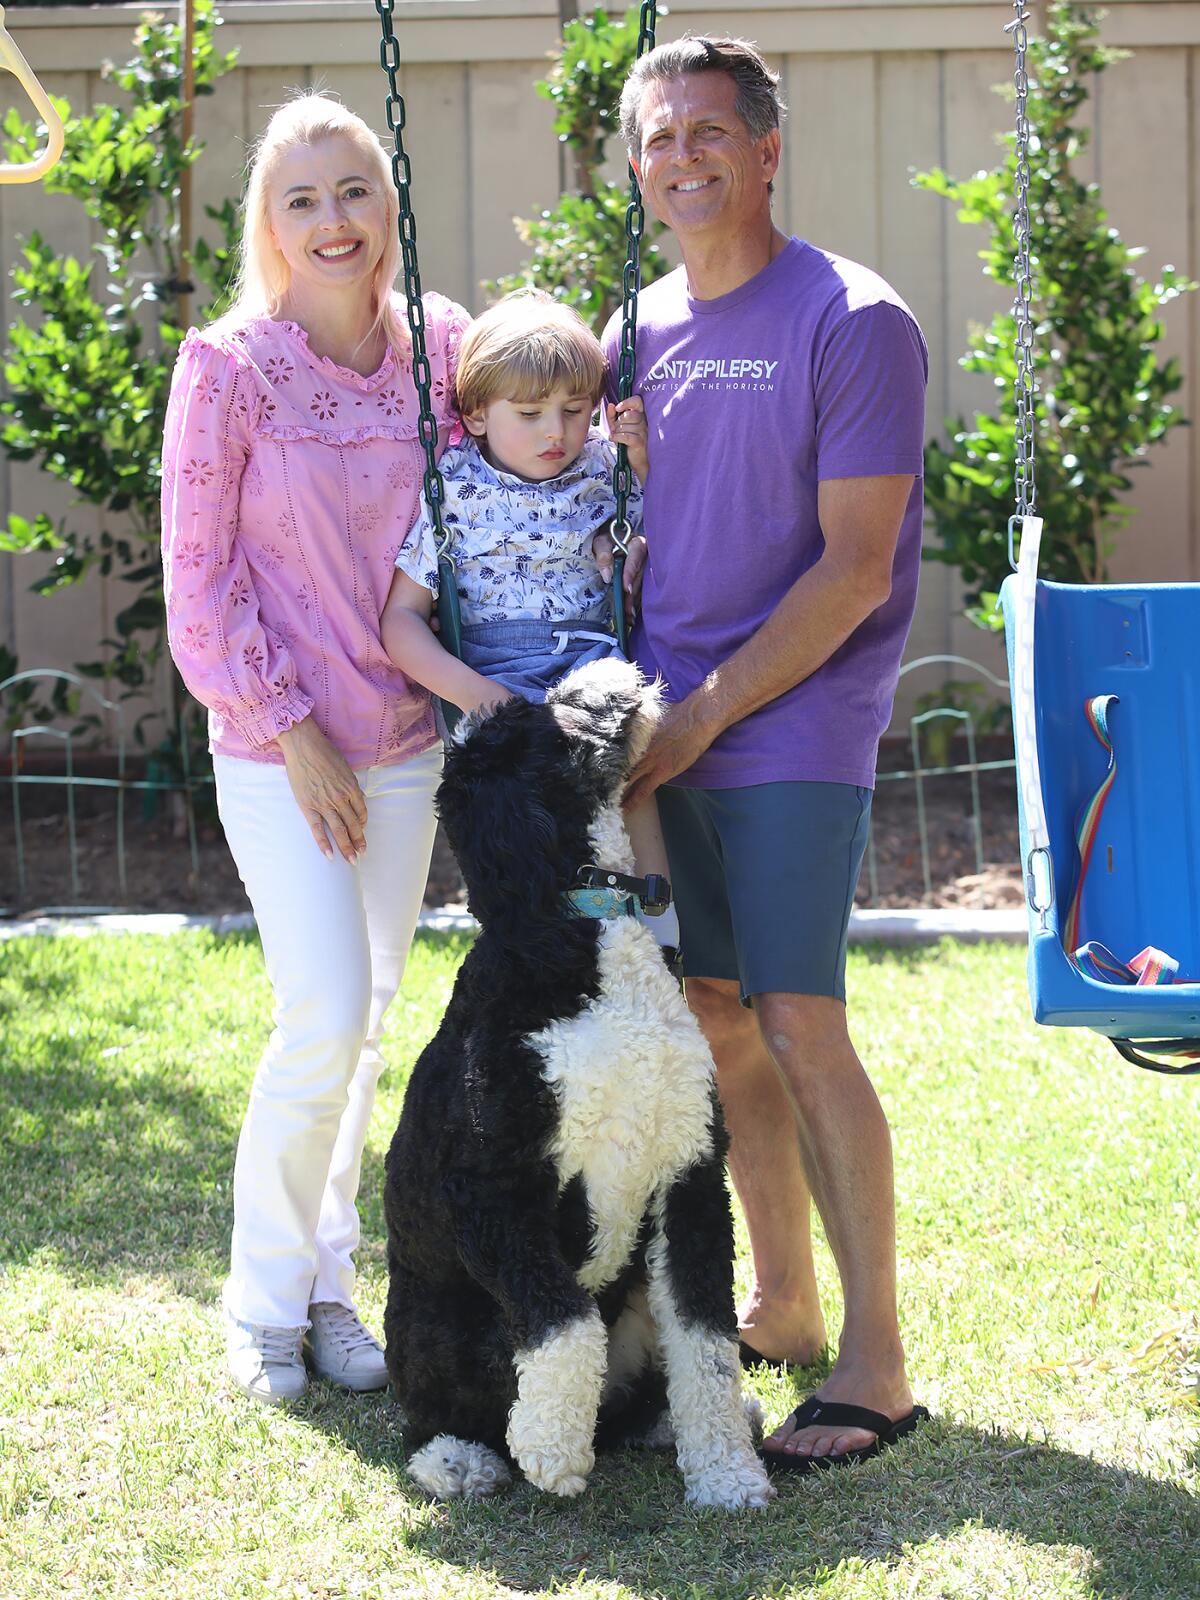 Andrew West, 7, swings in his backyard with parents Dr. Lisa Collea and Dr. Justin West, at their Newport Beach home.